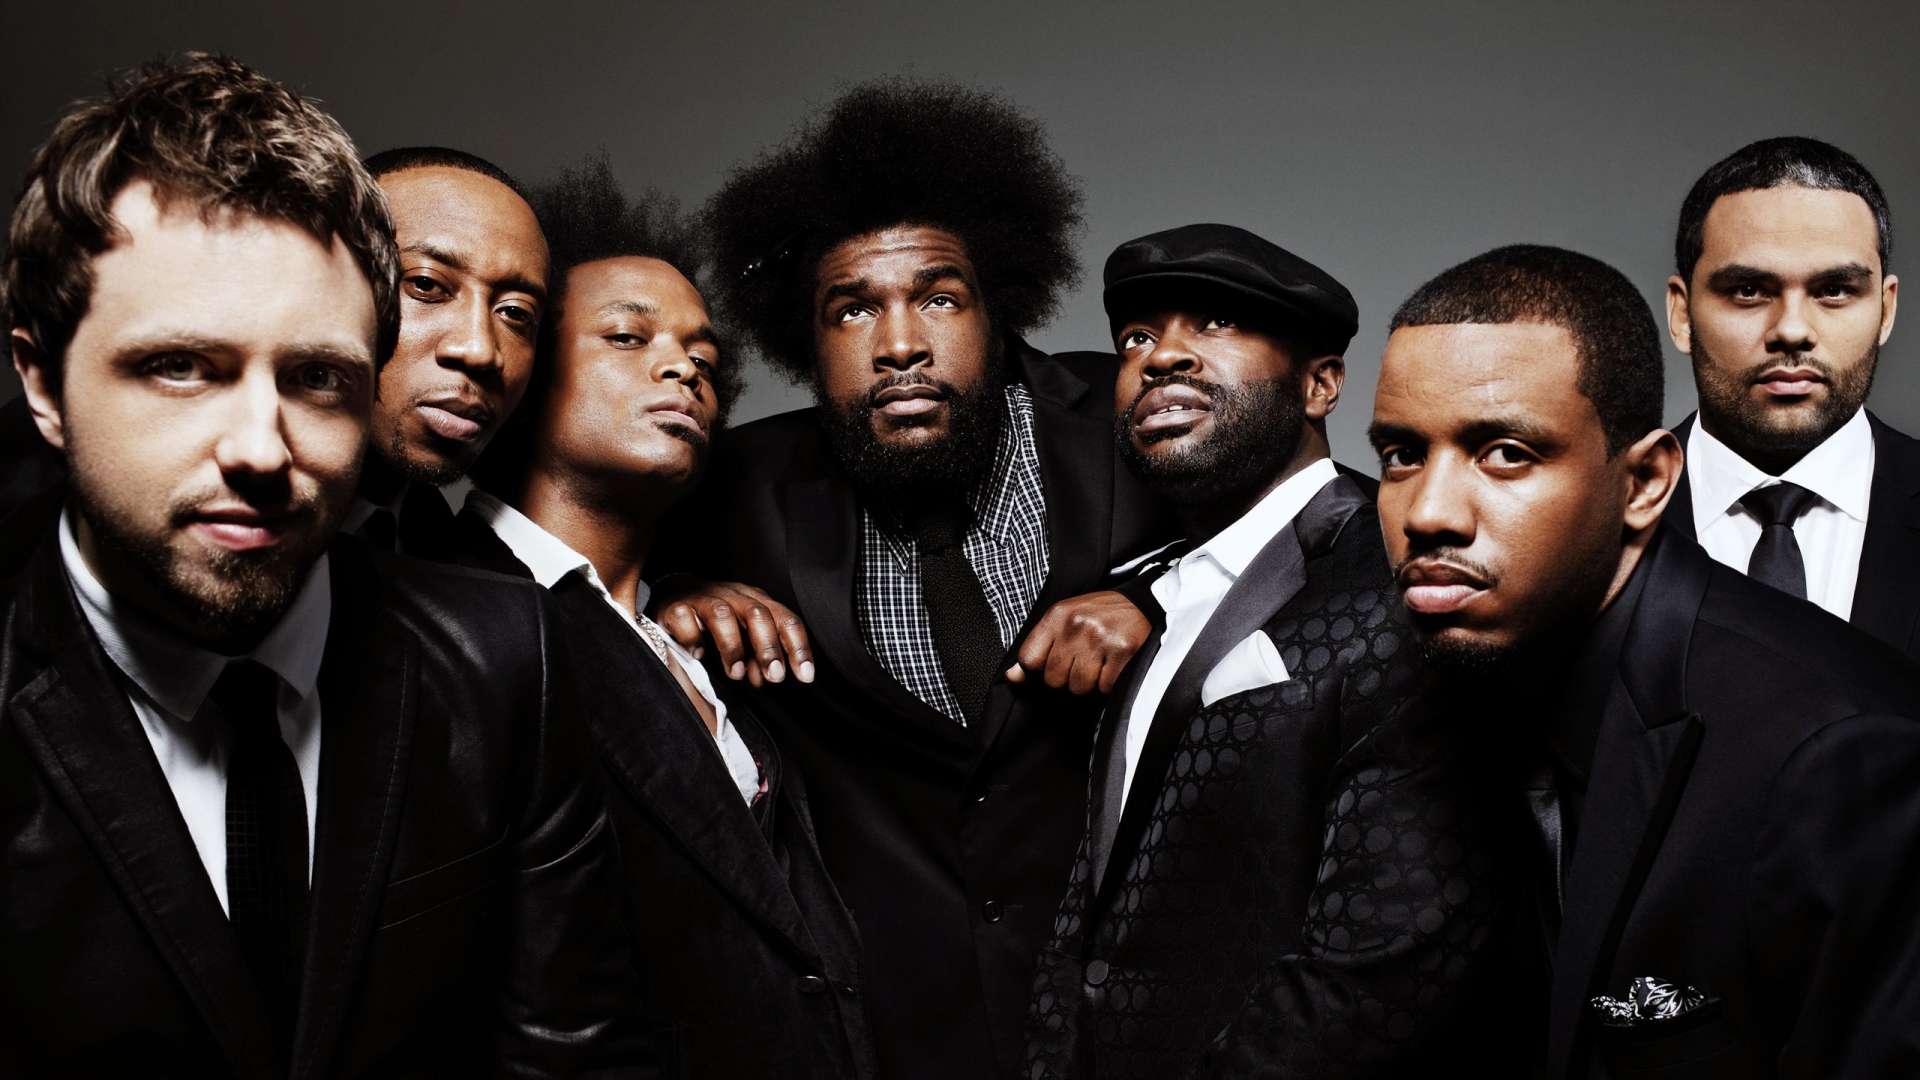 The Roots Band Photo Session for 1920 x 1080 HDTV 1080p resolution